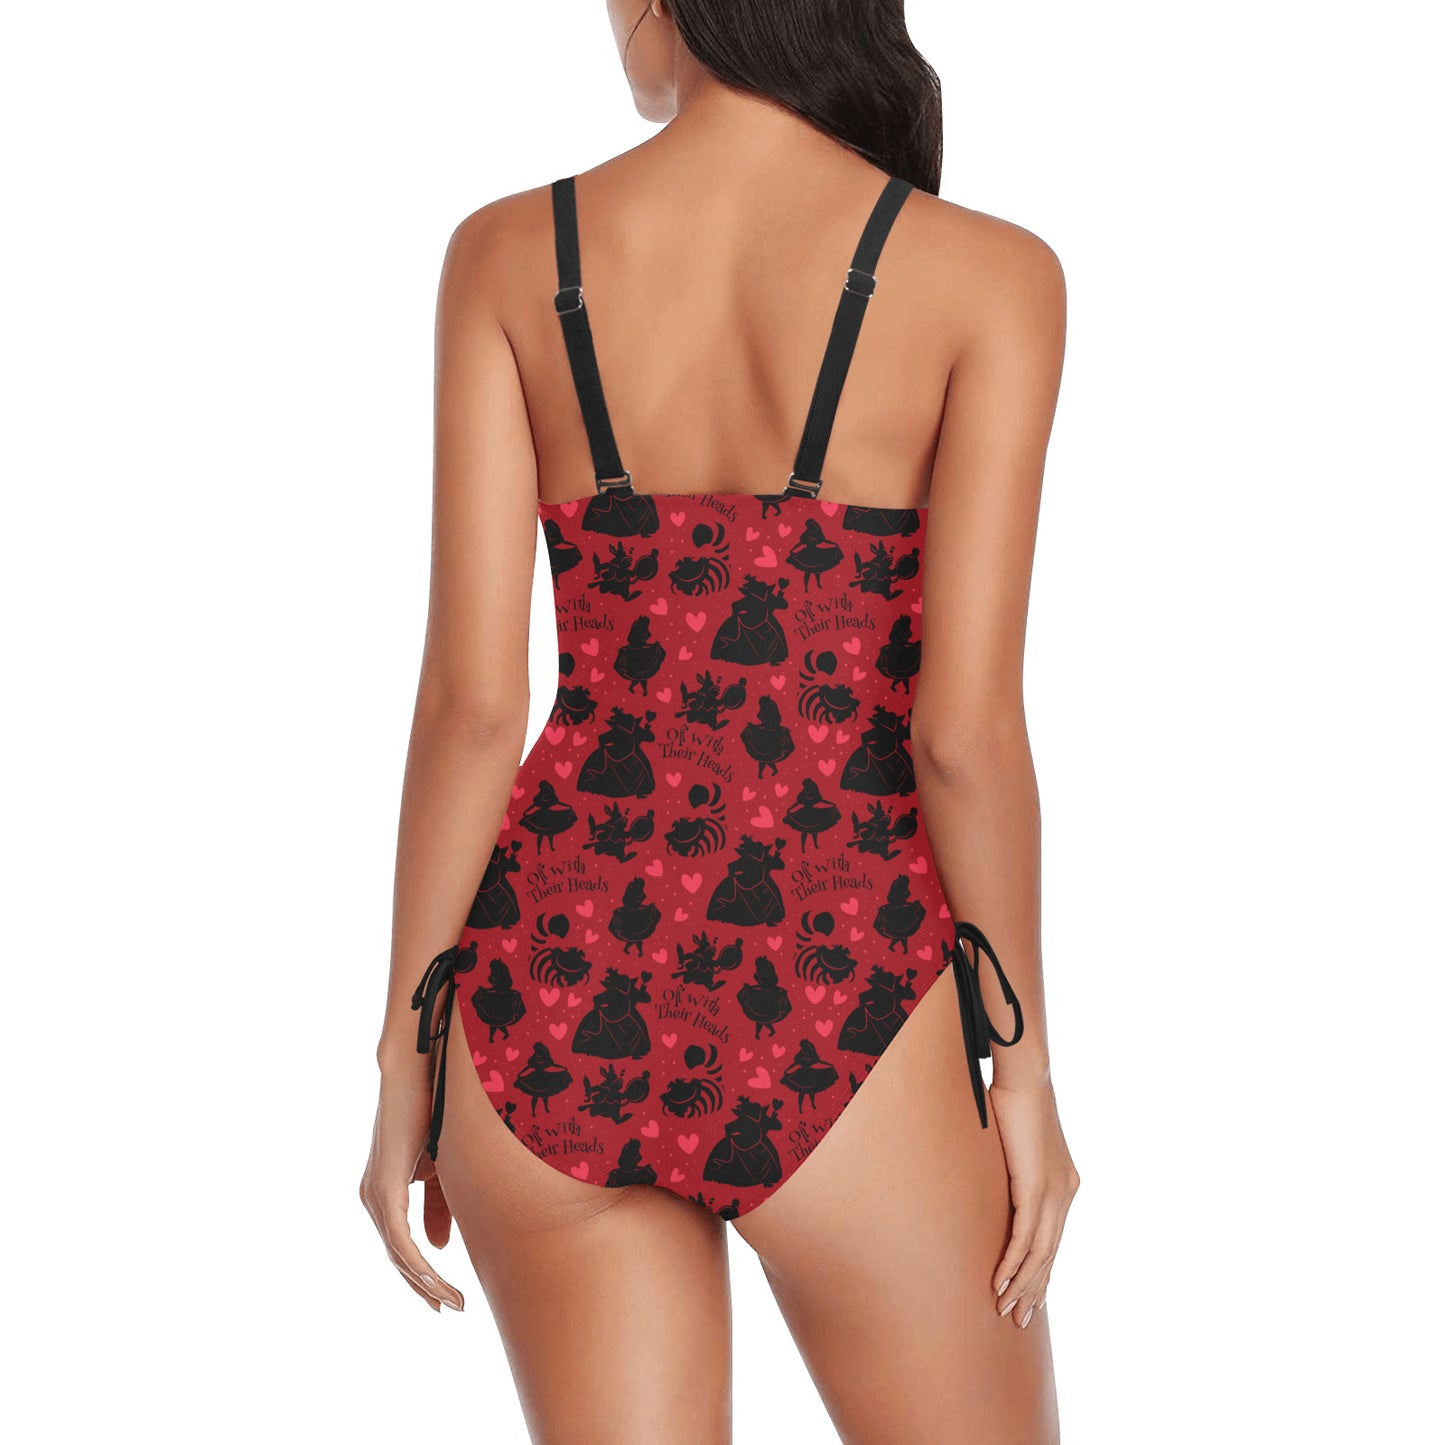 Off With Their Heads Drawstring Side Women's One-Piece Swimsuit